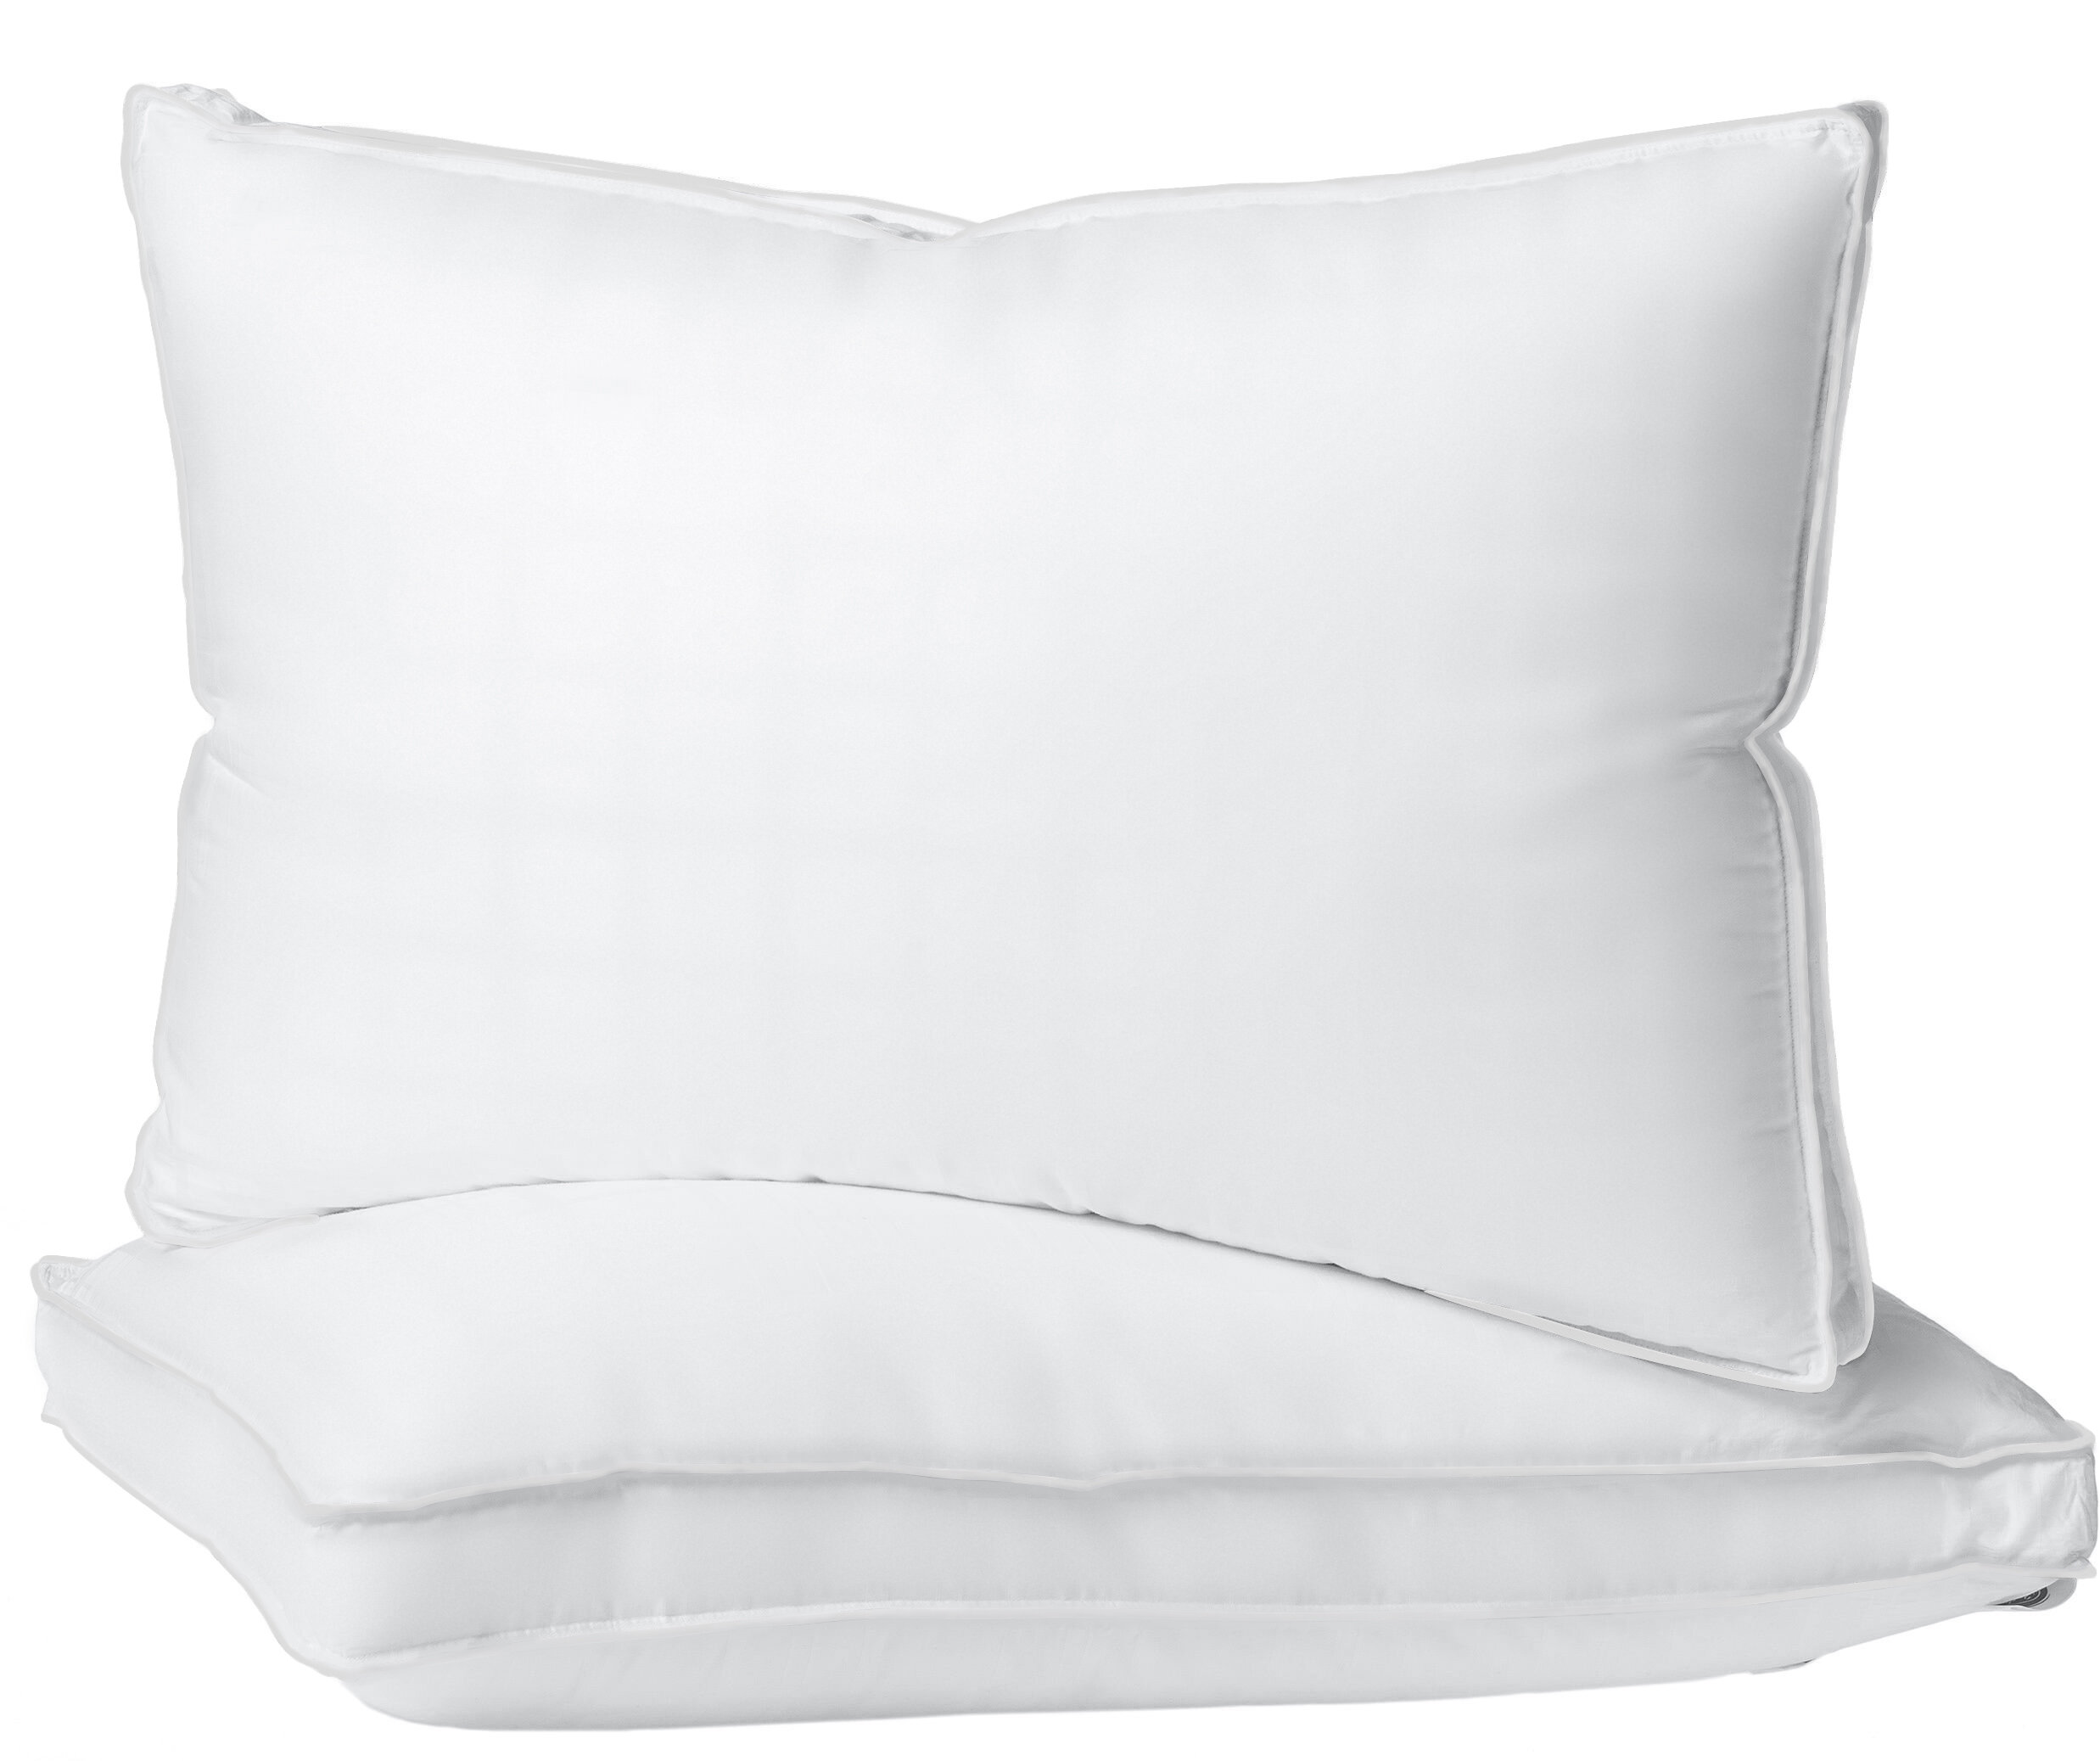 White Down Alternative Bed Pillow Standard Kind Euro Pillows for Sleeping